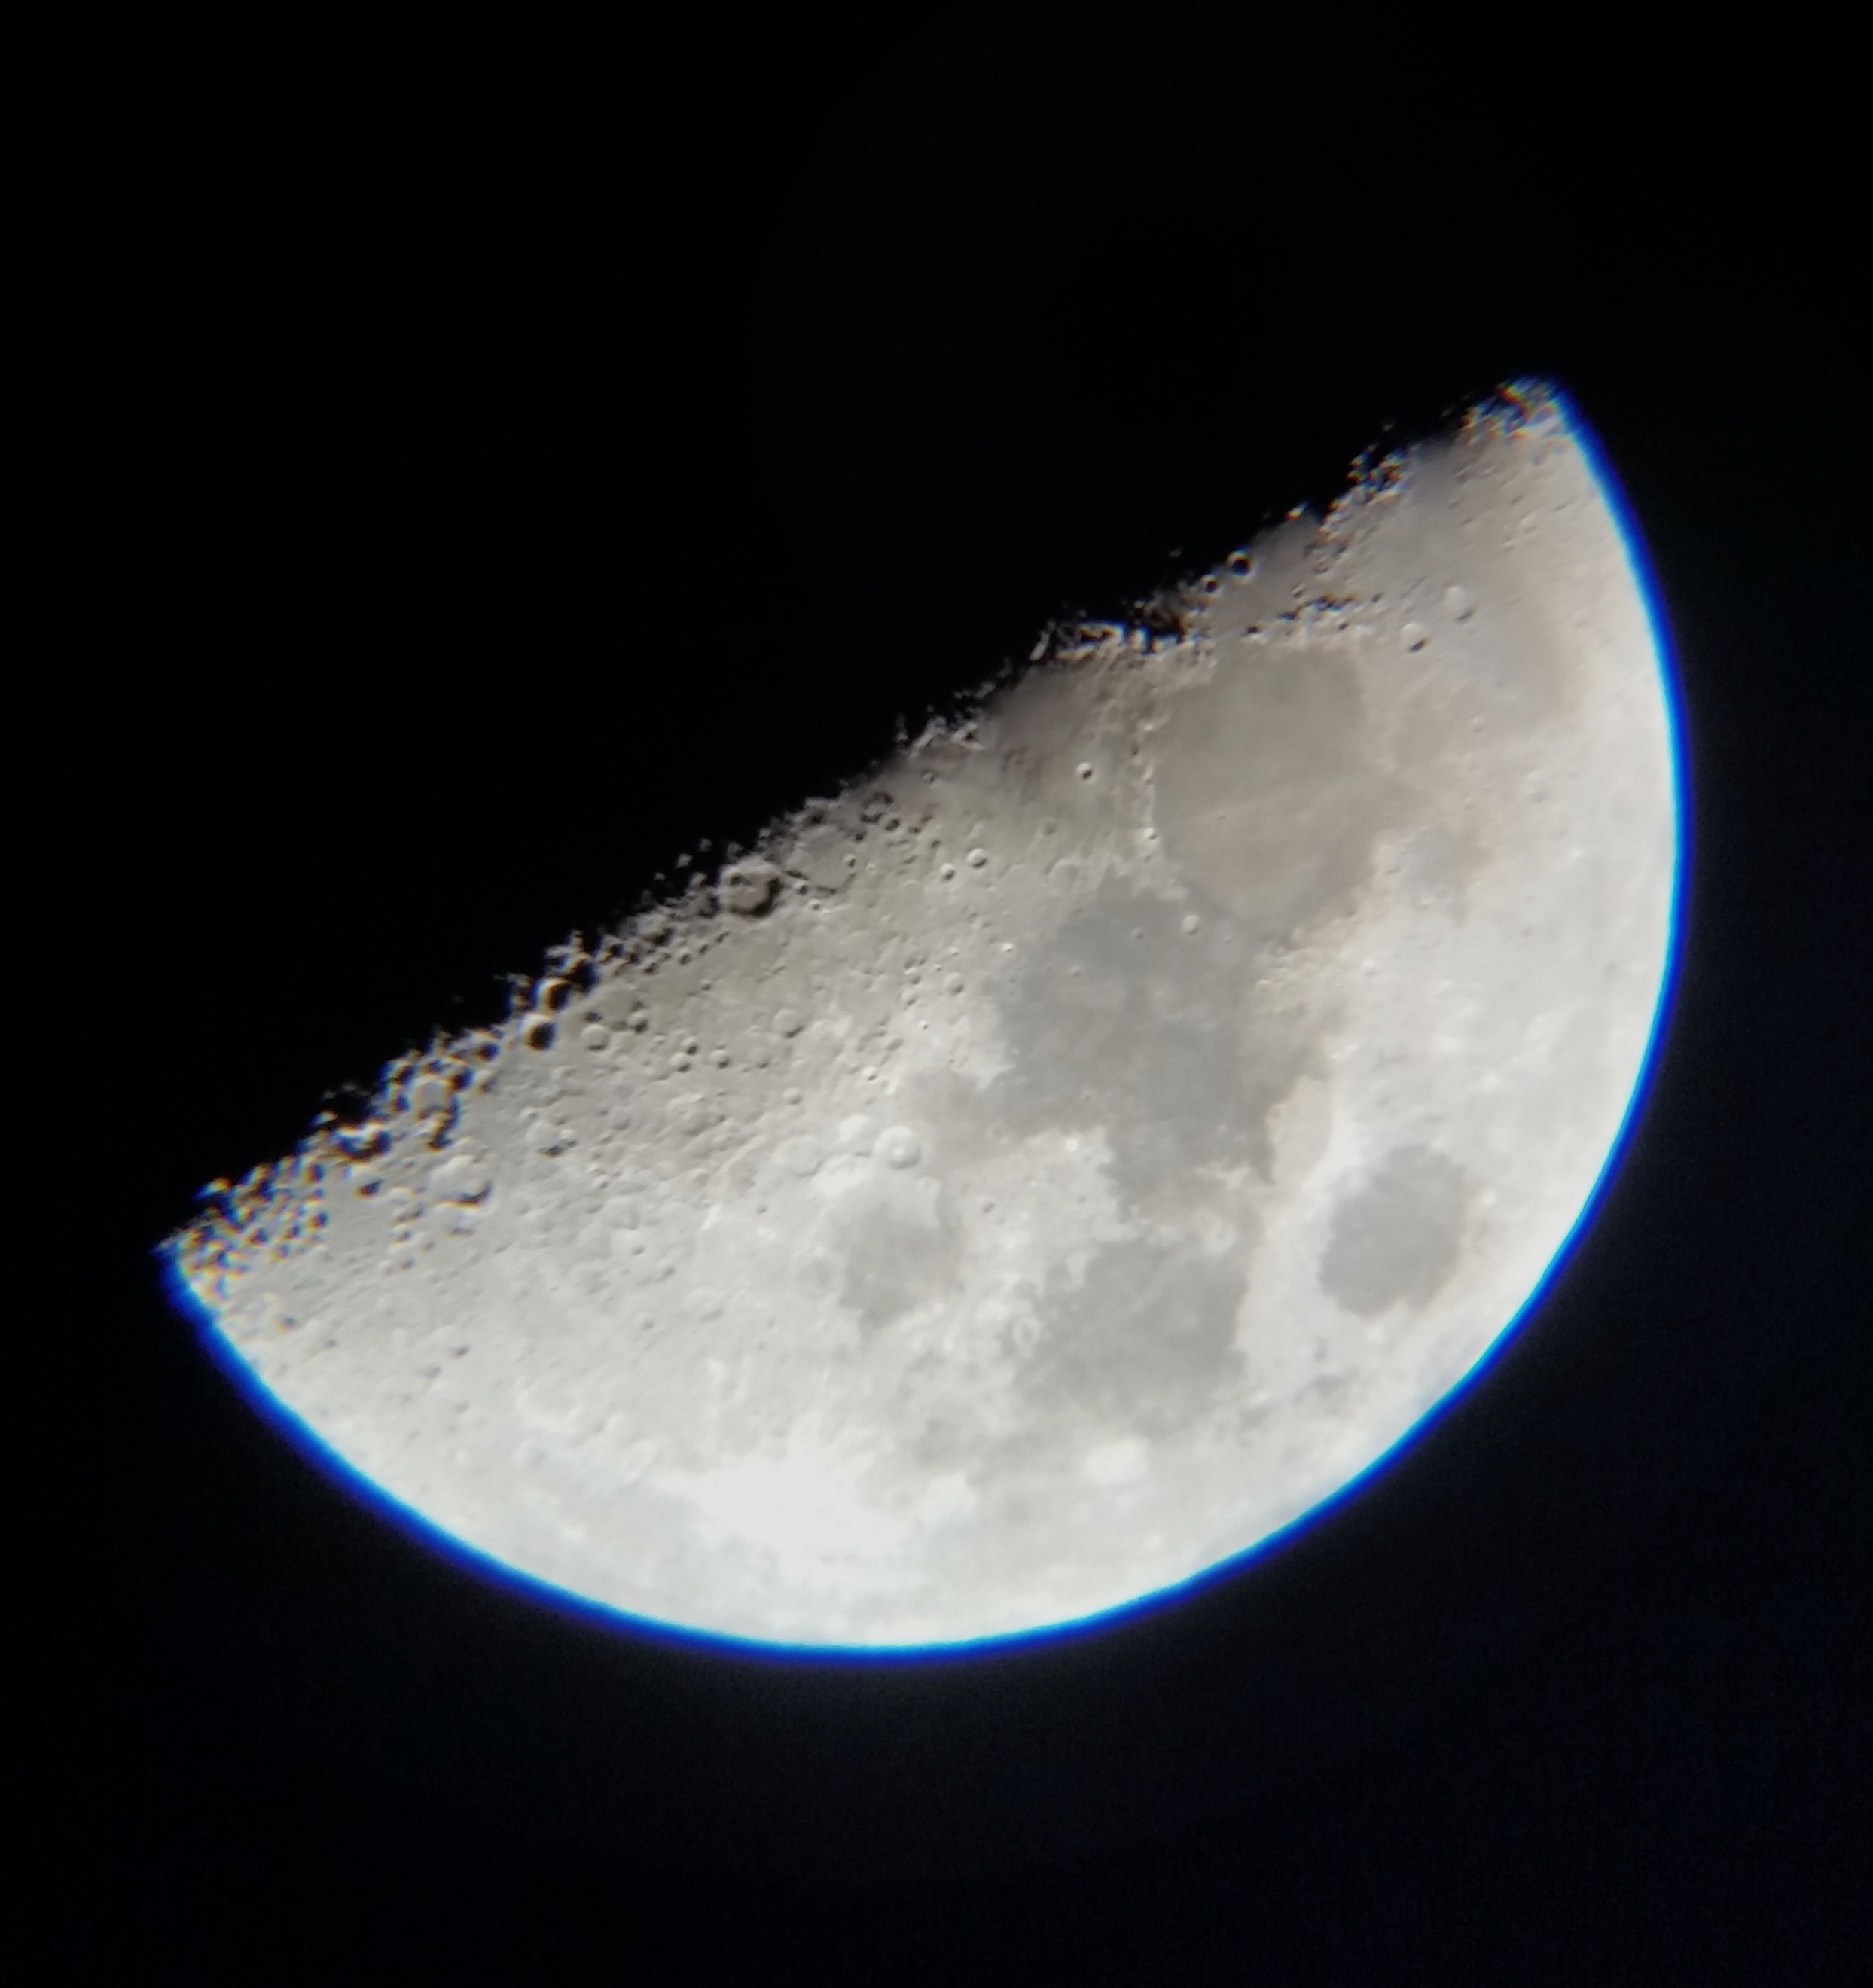 Every chance she gets, Tanya Oleksuik captures the moon and planets using her smartphone camera and a small telescope set up on her Toronto apartment balcony. On the evening of Dec. 28, 2014, she imaged the famous Lunar X, a pattern of light and shadows that occurs when the sun illuminates the first-quarter moon from a particular angle. It's on the shadowed edge, about one-third of the way from the left.